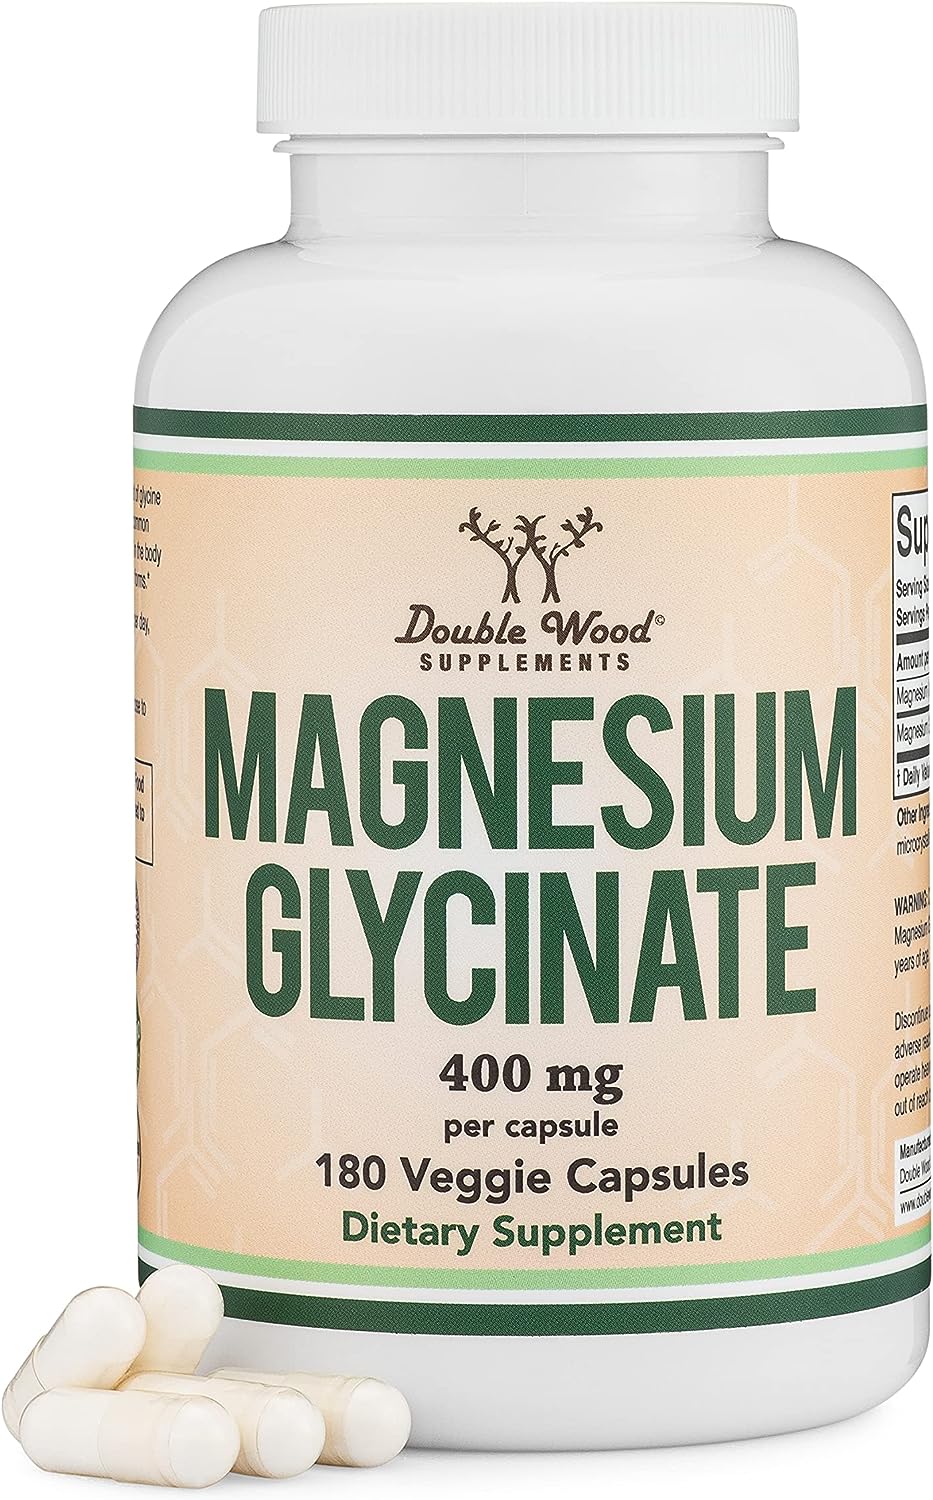 Double Wood Supplements Magnesium Glycinate 400mg, 180 Capsules - Vegan Safe, Manufactured and Third